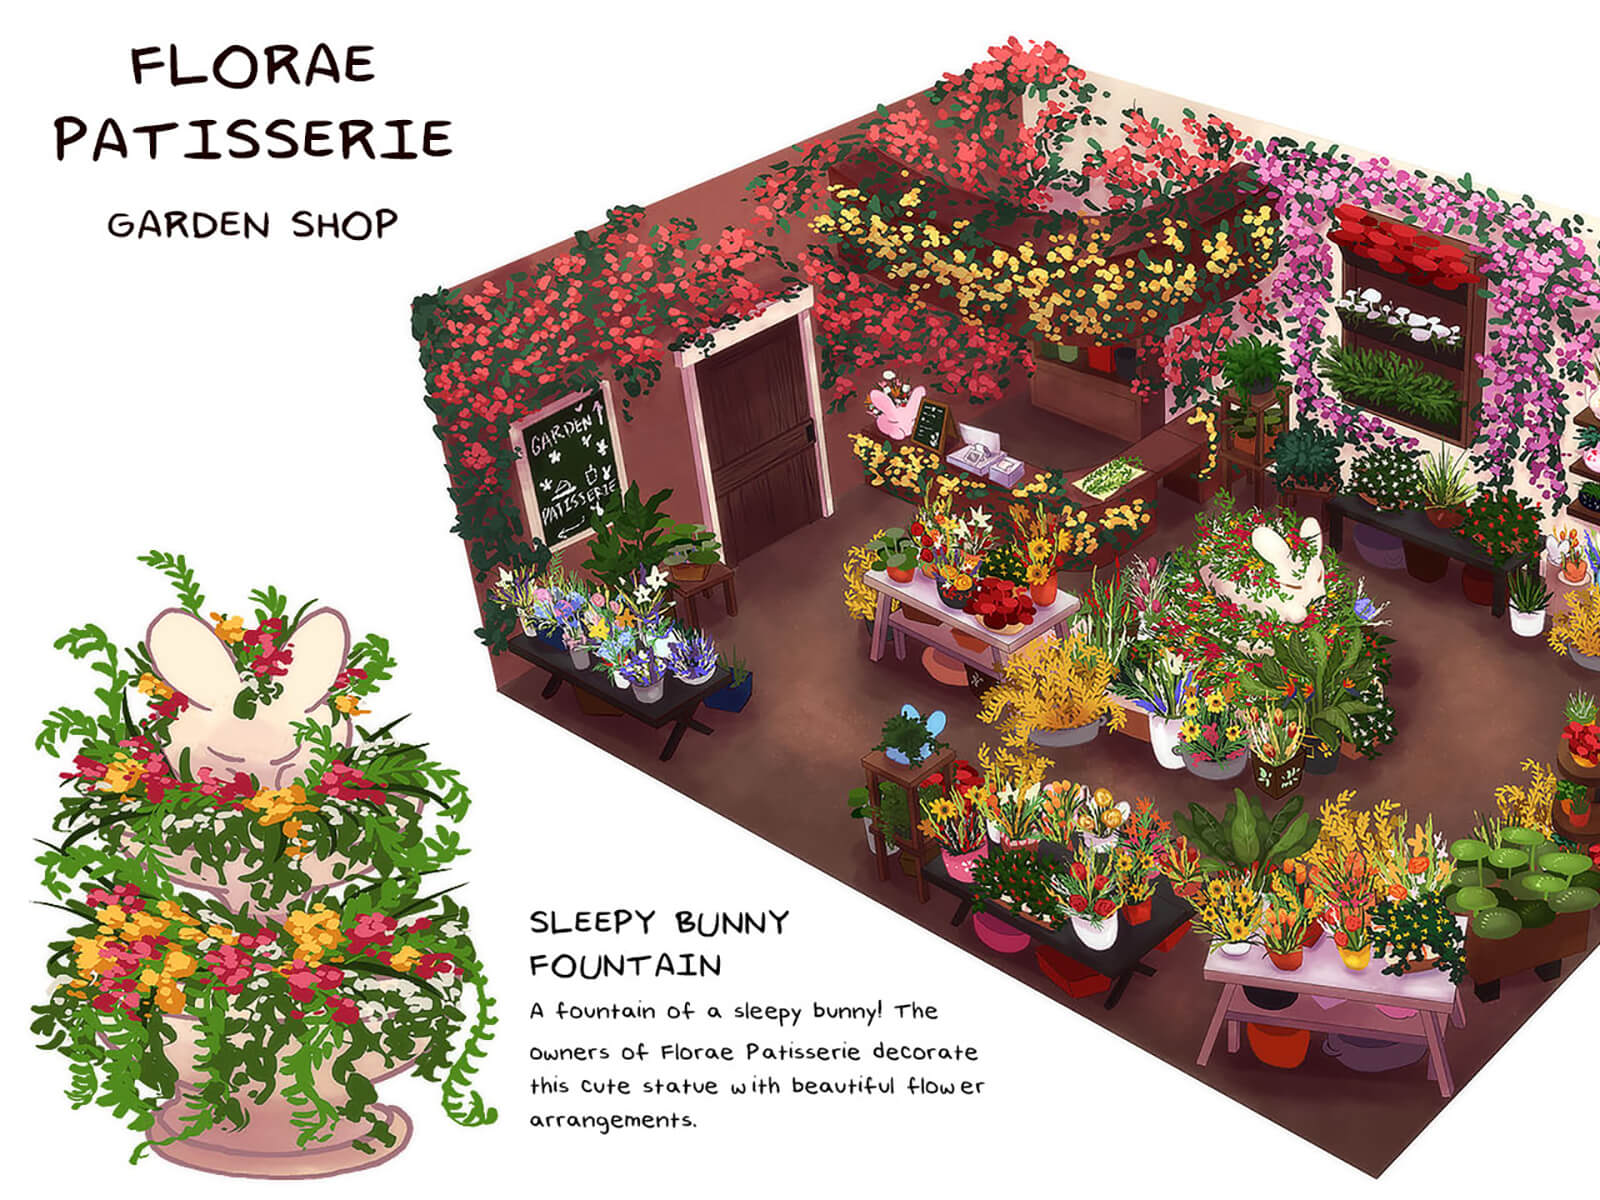 A cut-away view of a garden shop filled with flowers